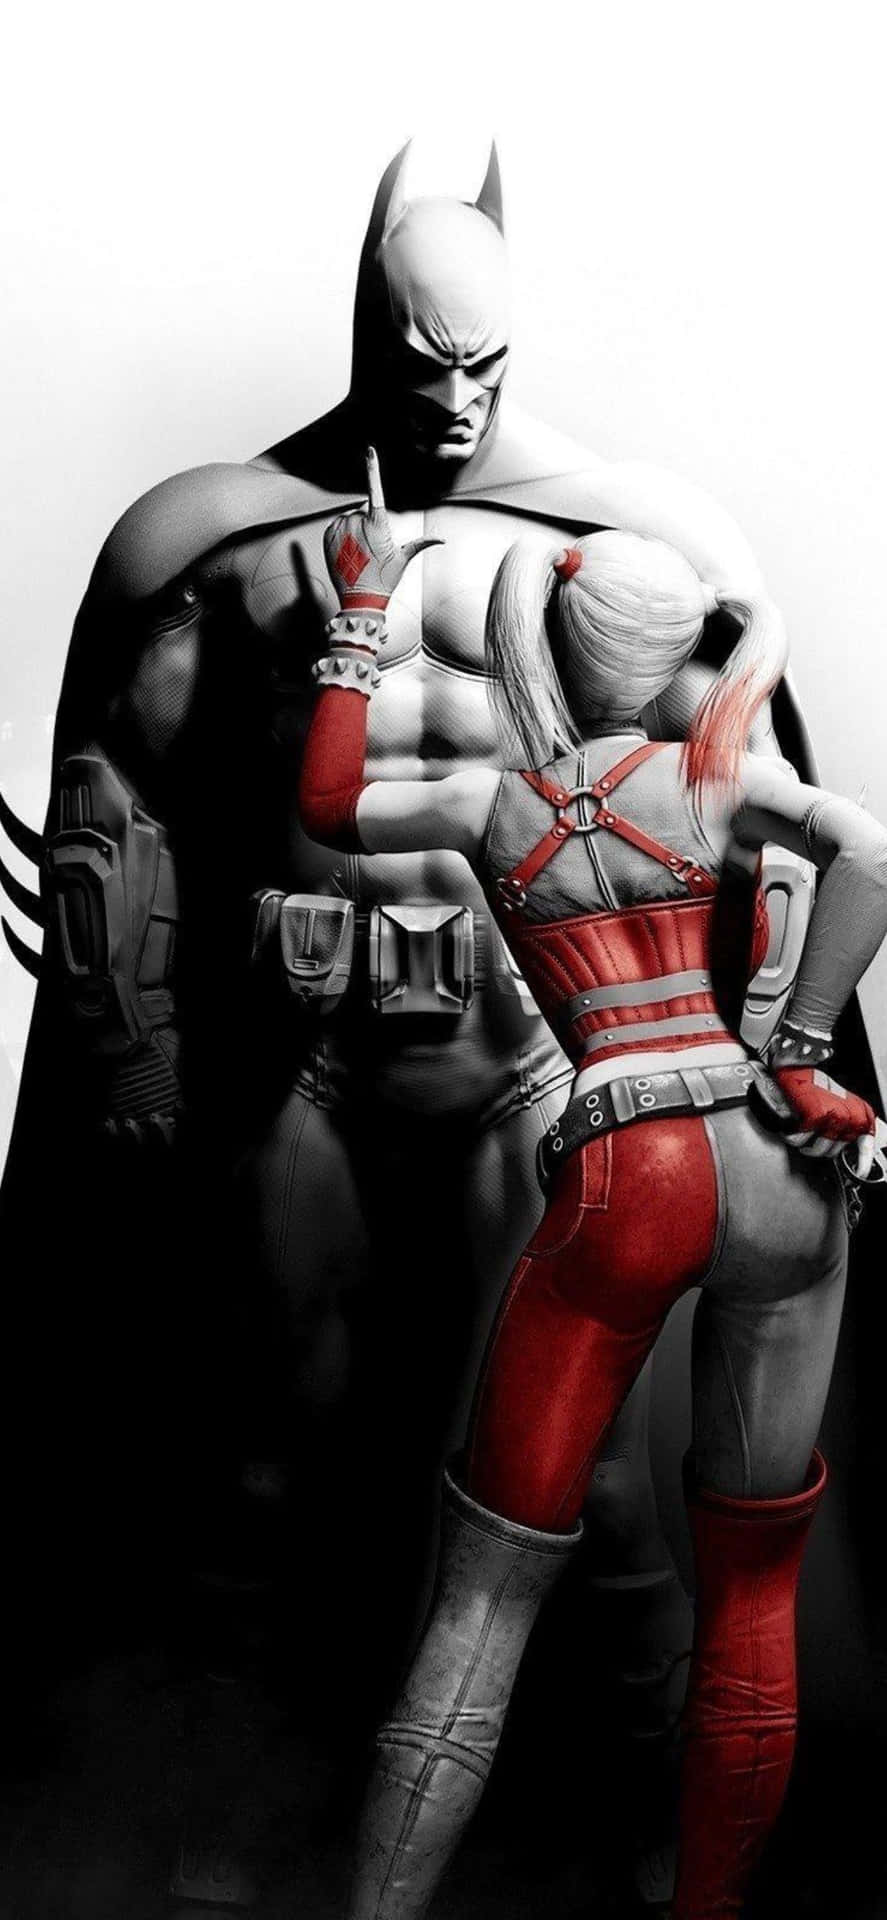 A Black And White Image Of A Batman And Harley